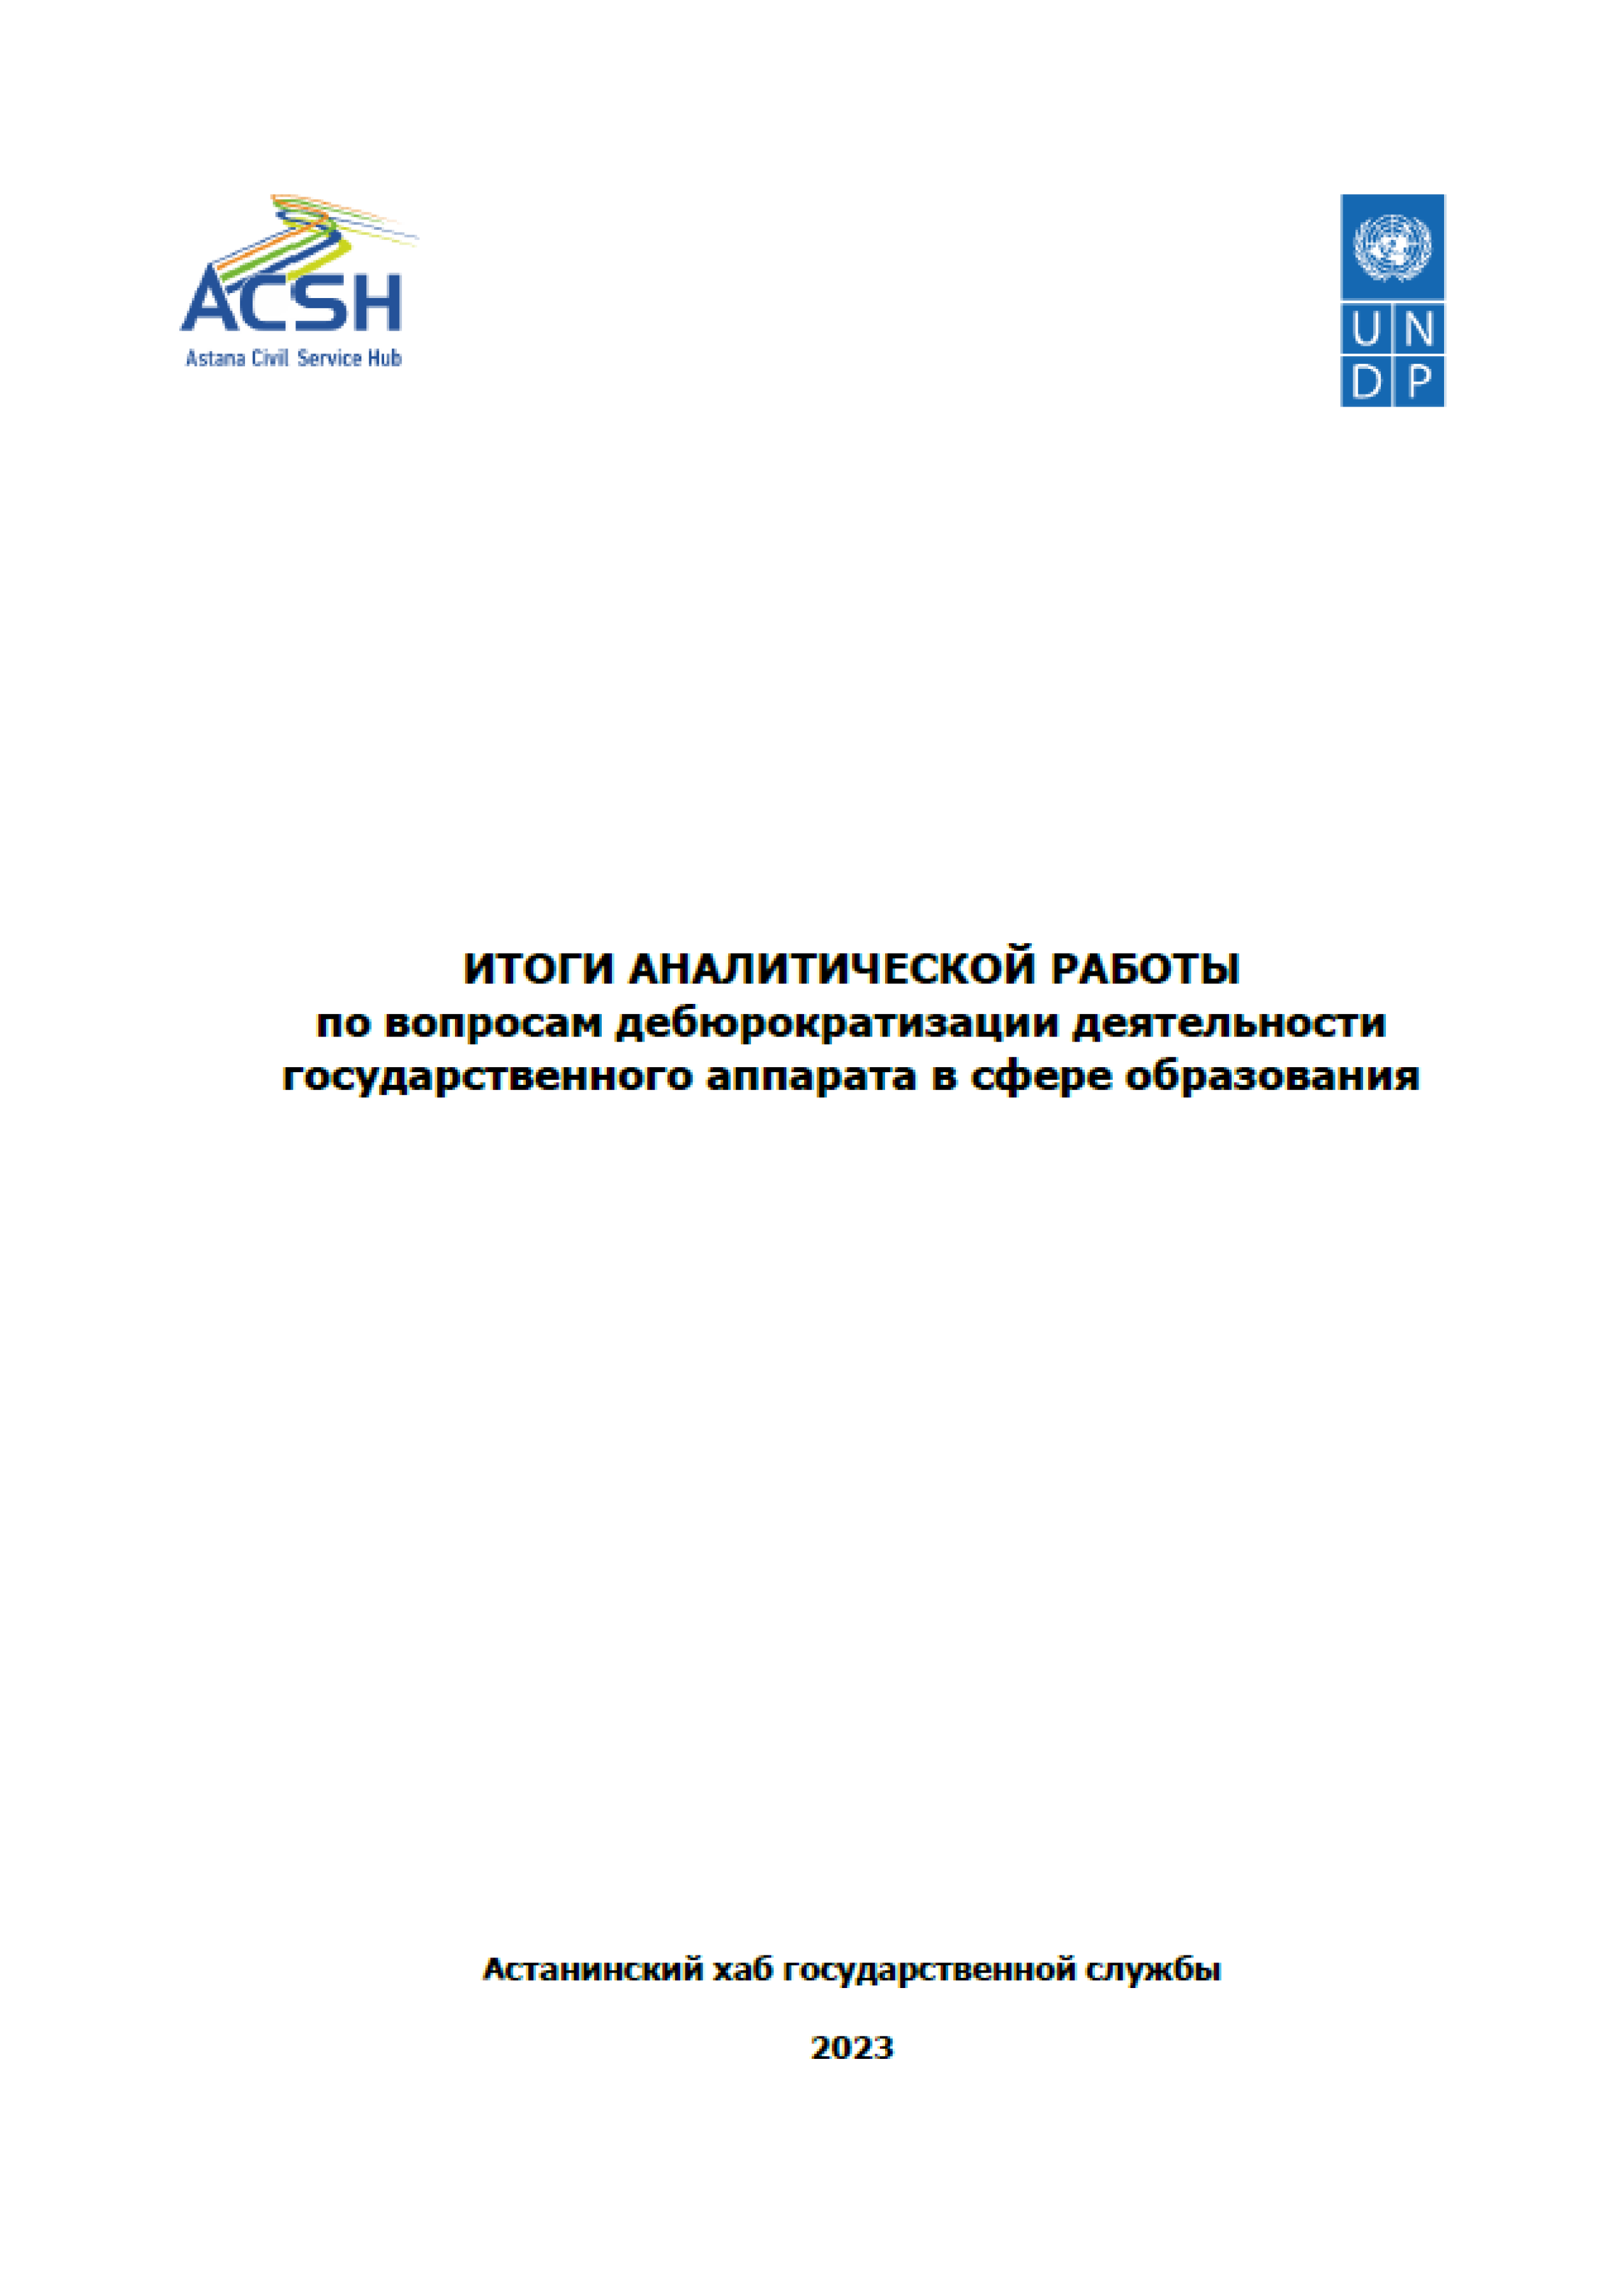 The results of the analytical work on the issues of de-bureaucratization of the activities of the state apparatus in the field of education